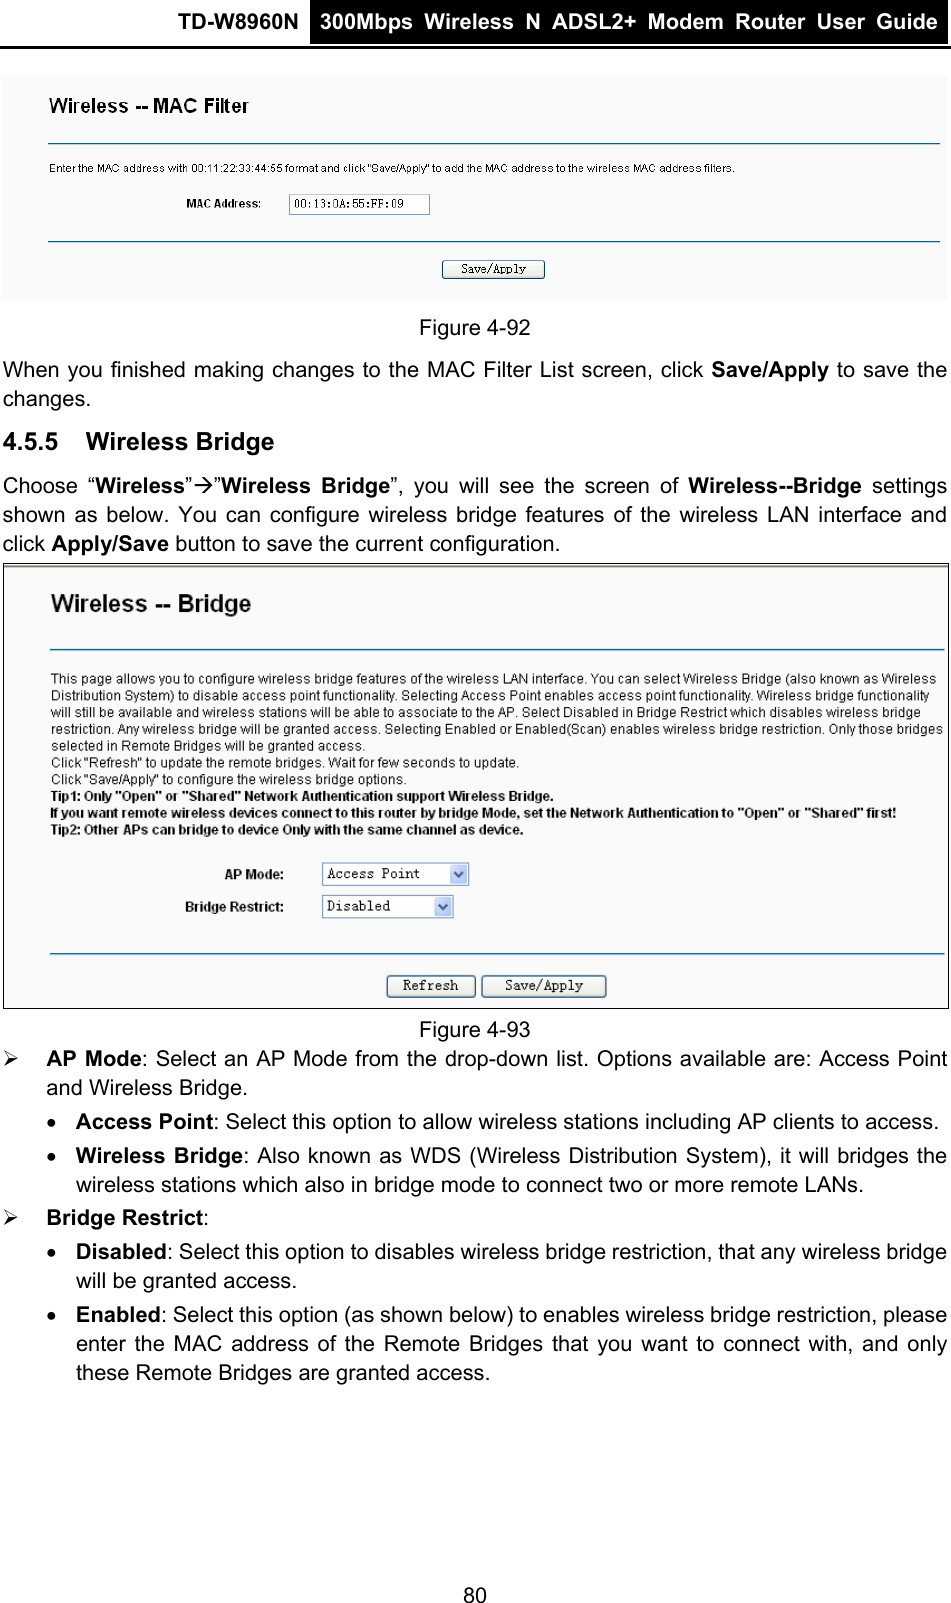 TD-W8960N  300Mbps Wireless N ADSL2+ Modem Router User Guide   Figure 4-92 When you finished making changes to the MAC Filter List screen, click Save/Apply to save the changes. 4.5.5  Wireless Bridge Choose “Wireless””Wireless Bridge”, you will see the screen of Wireless--Bridge settings shown as below. You can configure wireless bridge features of the wireless LAN interface and click Apply/Save button to save the current configuration.  Figure 4-93  AP Mode: Select an AP Mode from the drop-down list. Options available are: Access Point and Wireless Bridge.    Access Point: Select this option to allow wireless stations including AP clients to access.    Wireless Bridge: Also known as WDS (Wireless Distribution System), it will bridges the wireless stations which also in bridge mode to connect two or more remote LANs.  Bridge Restrict:  Disabled: Select this option to disables wireless bridge restriction, that any wireless bridge will be granted access.  Enabled: Select this option (as shown below) to enables wireless bridge restriction, please enter the MAC address of the Remote Bridges that you want to connect with, and only these Remote Bridges are granted access. 80 